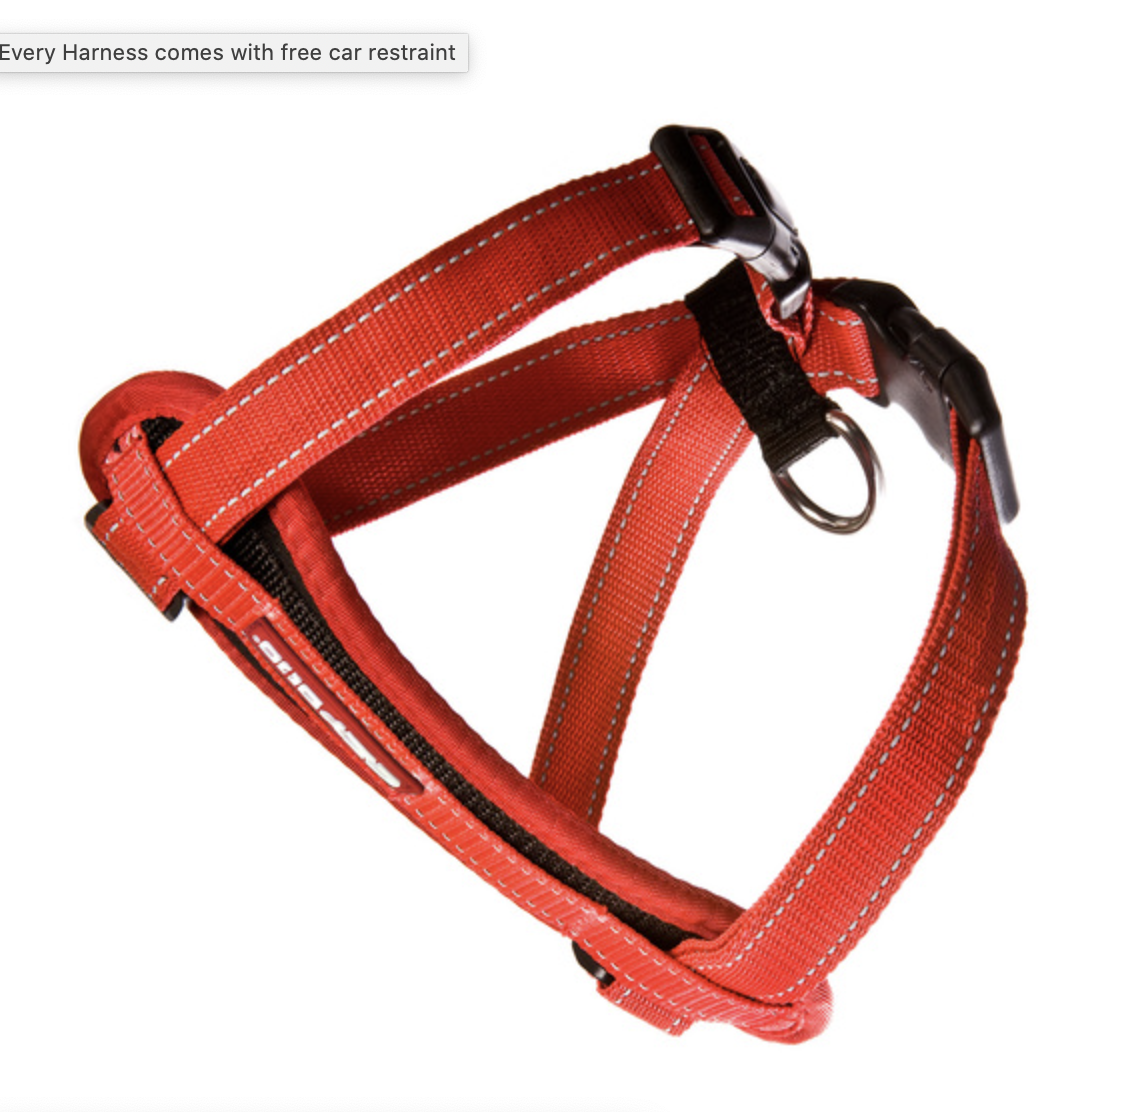 EzyDog Chest Plate Harness, Red